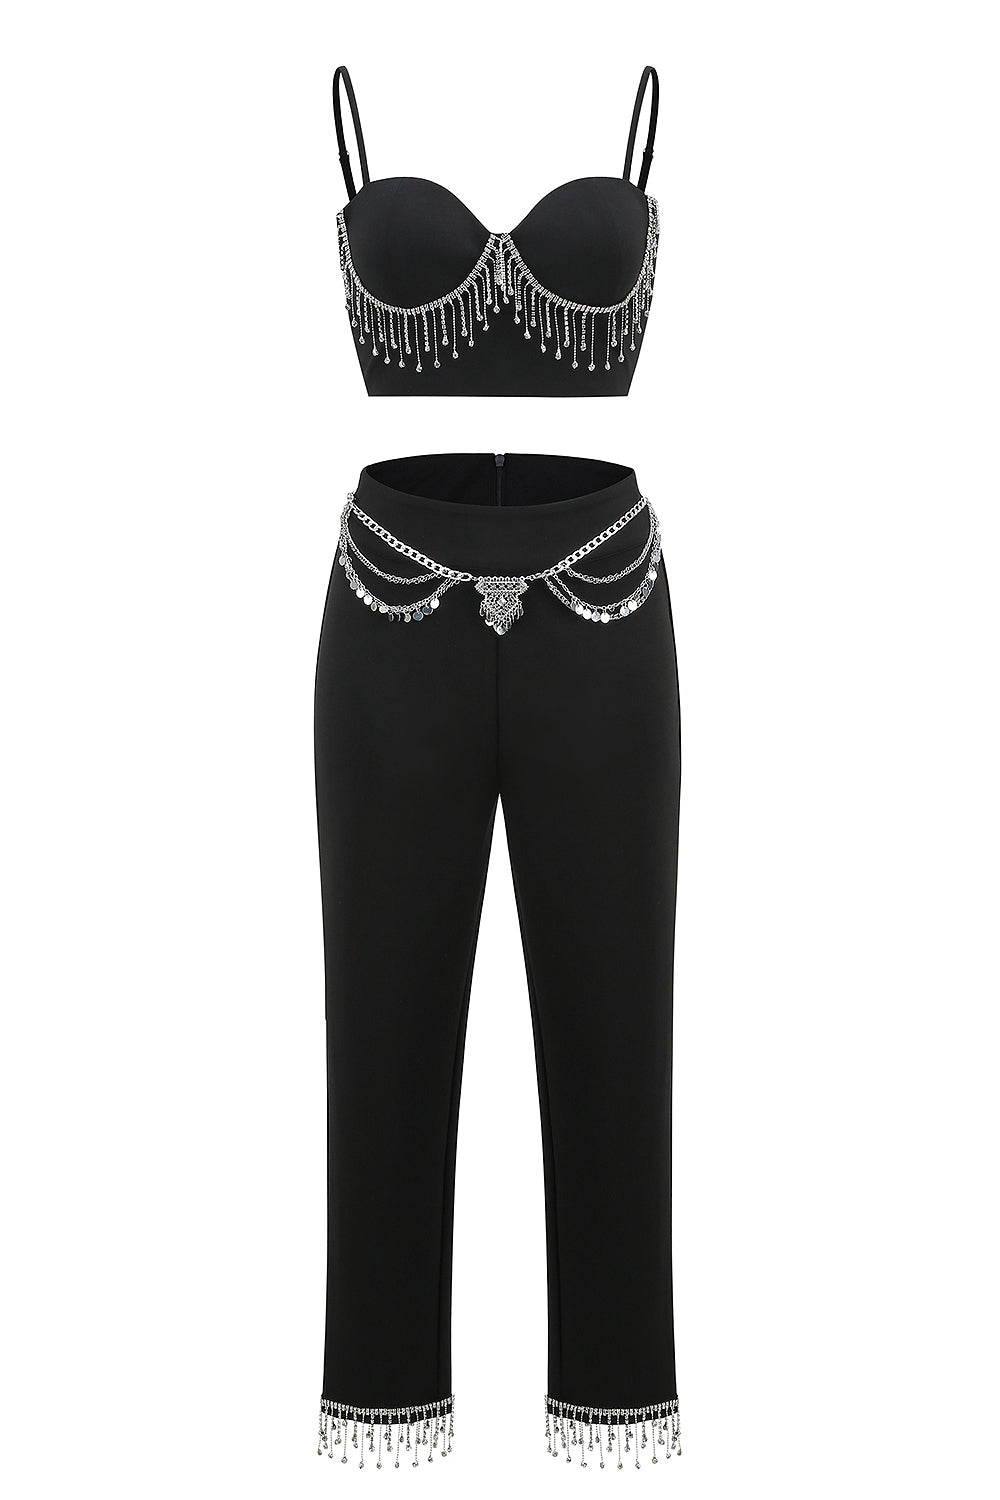 Black Two Pieces Set Strappy Crystal Short Top And Bodycon Pants